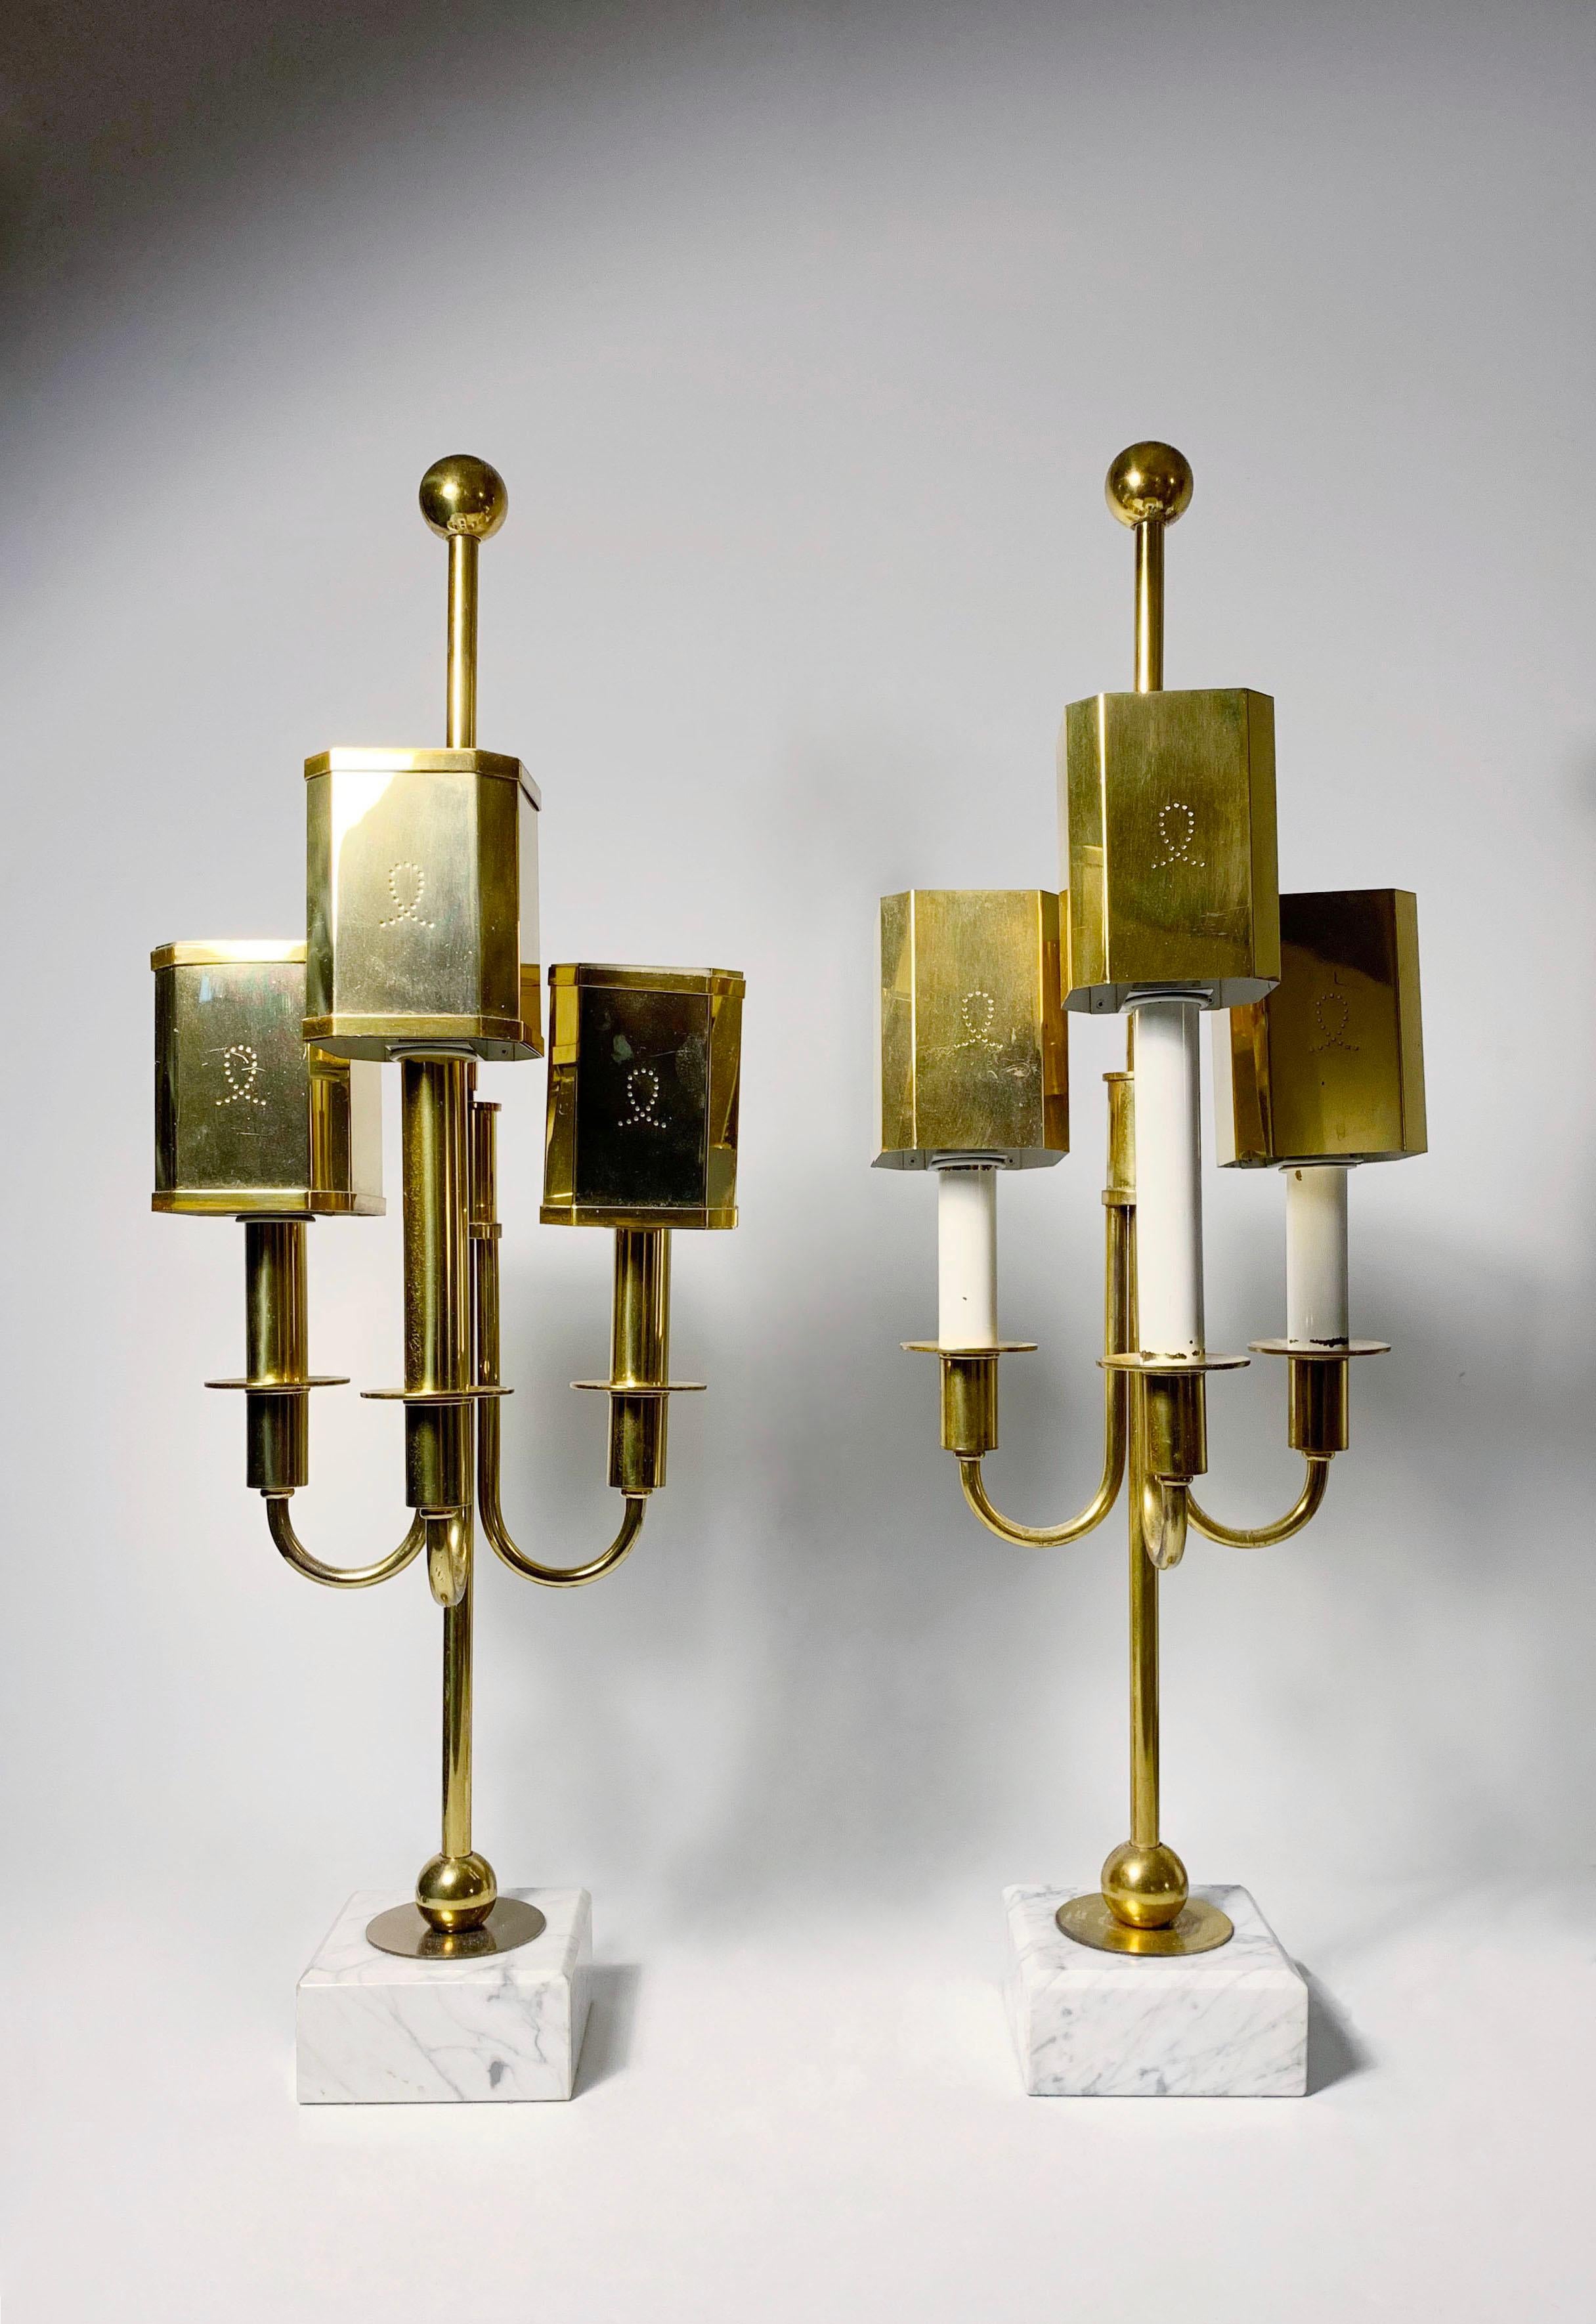 Pair of vintage brass table lamps in the manner of Tommi Parzinger. Possibly Swedish. No identifying marks.

Some very subtle differences between the pair. 
White painted candle version is ever so slightly taller. does not have the brass borders on